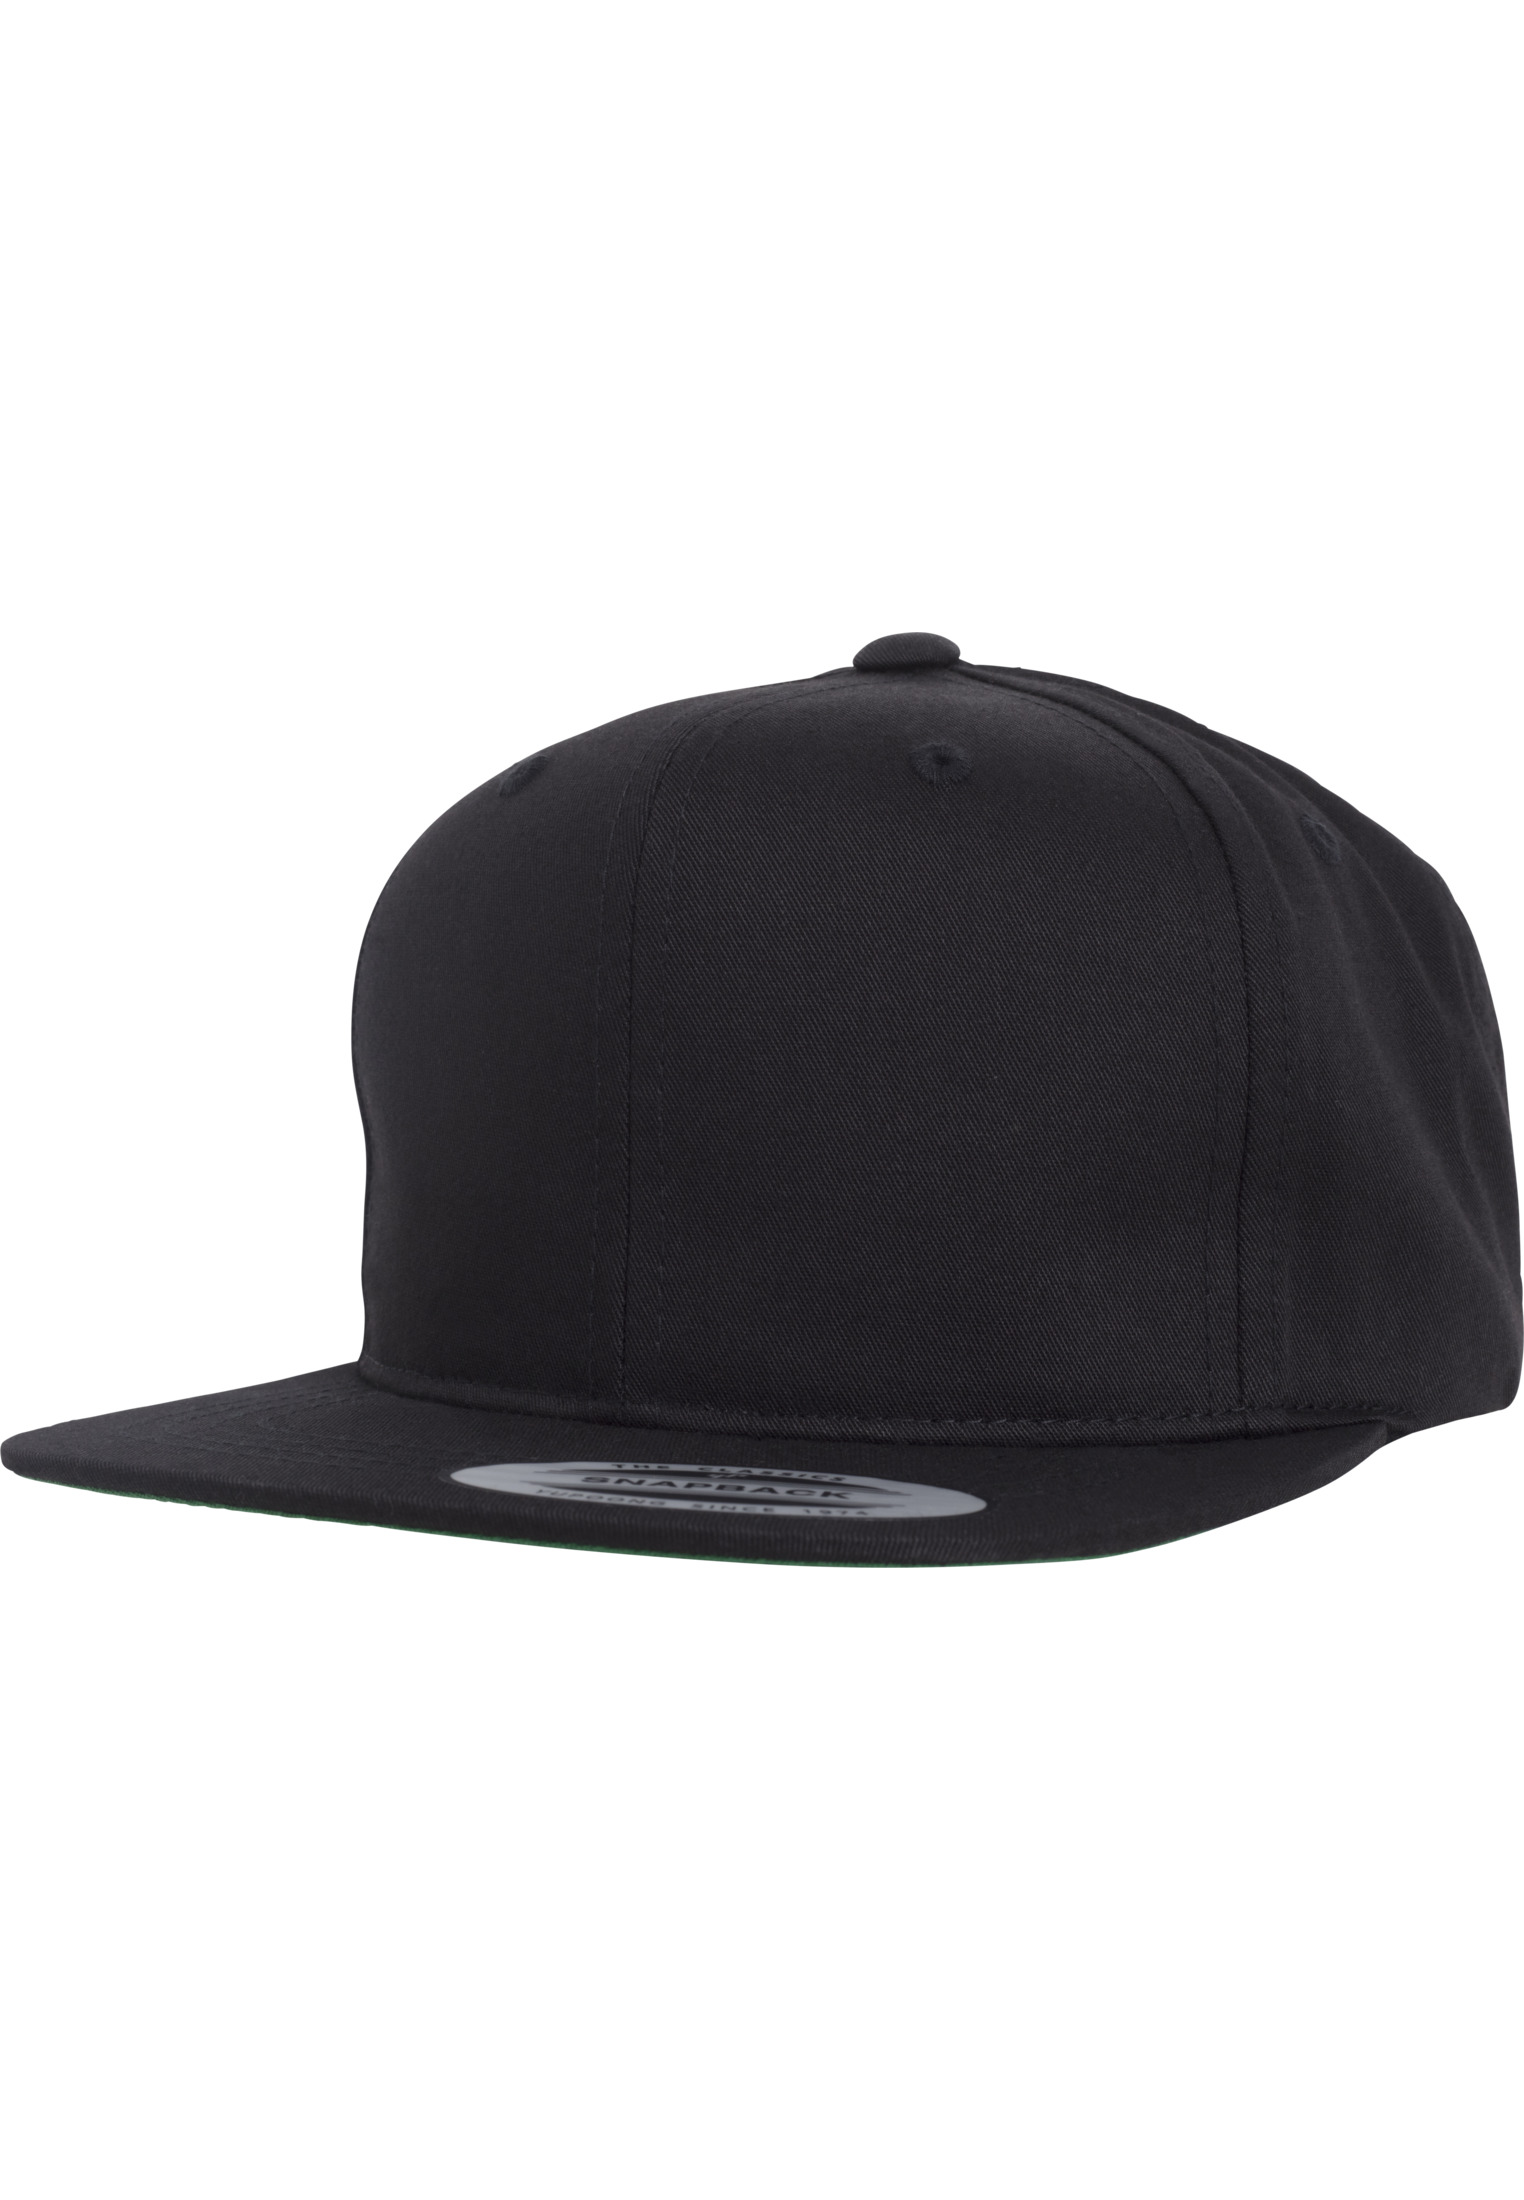 Kids Pro-Style Twill Snapback Youth Cap in Farbe black